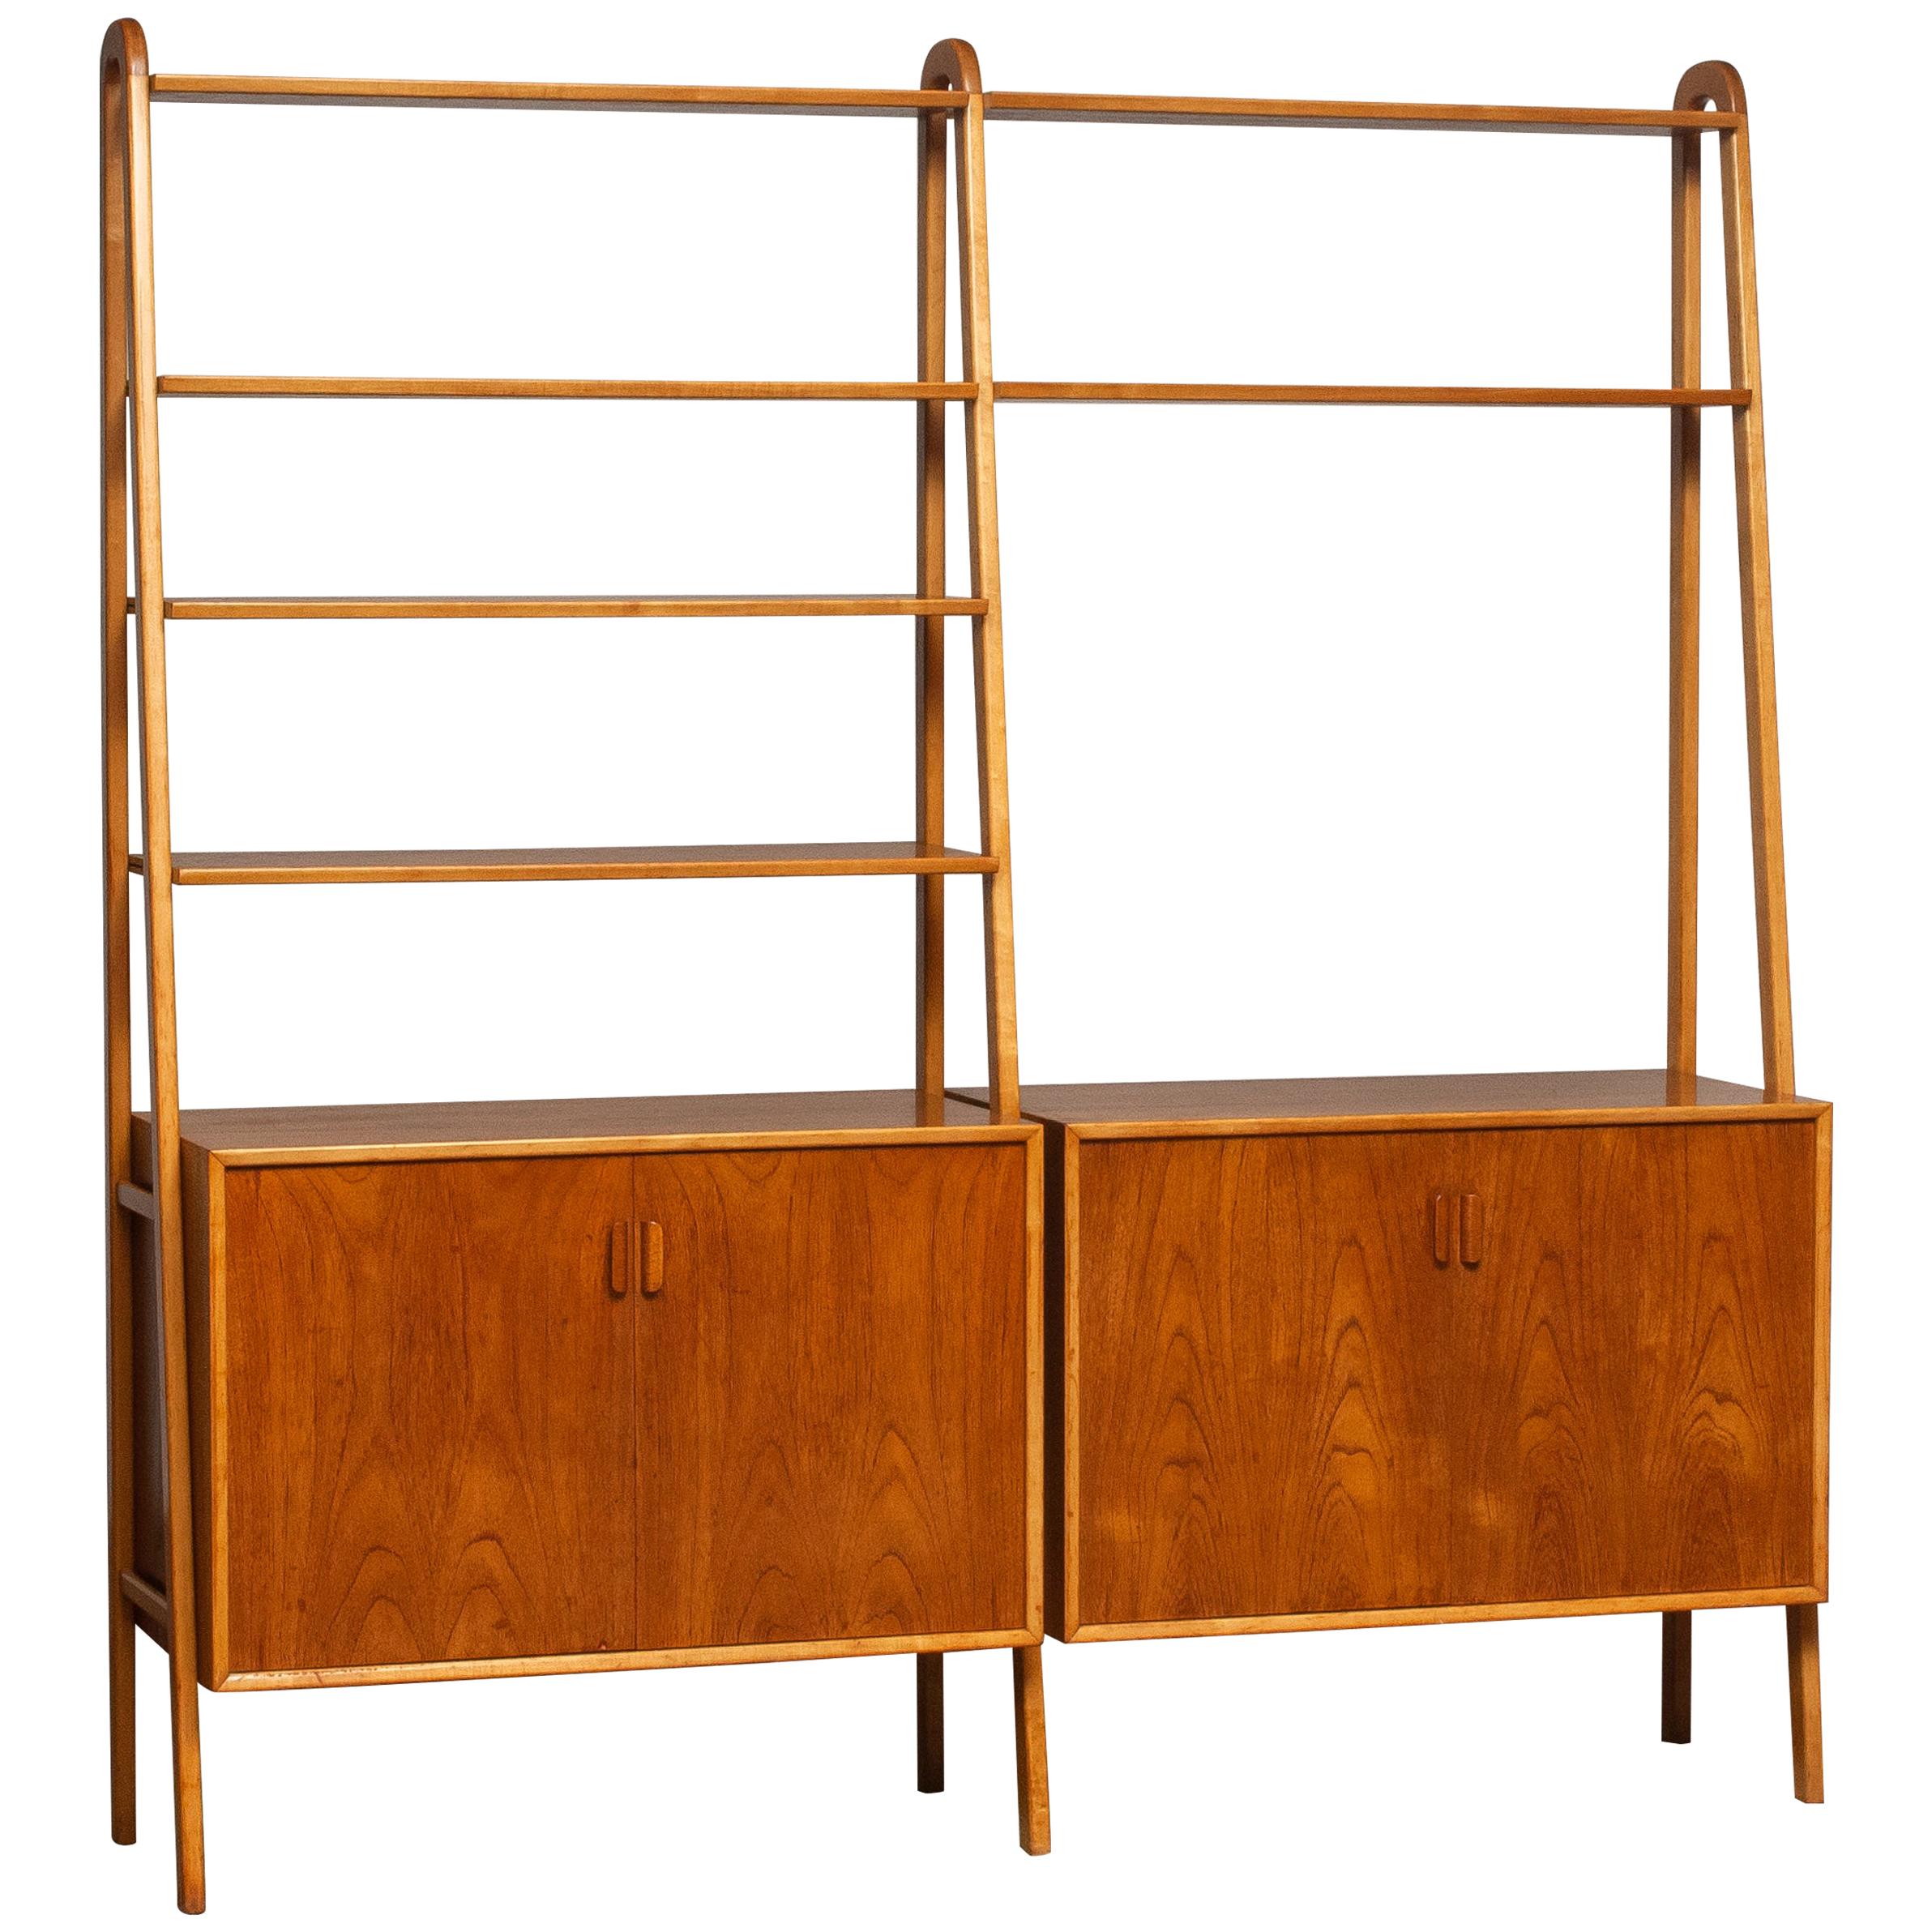 Beautiful and typical Swedish bookcase / shelfs cabinet in teak in combination with beech stands made by Brantorps, Sweden.
This cabinet consists six shelfs in which four are adjustable. The two on the top are fixed.
Two cabinets and also both